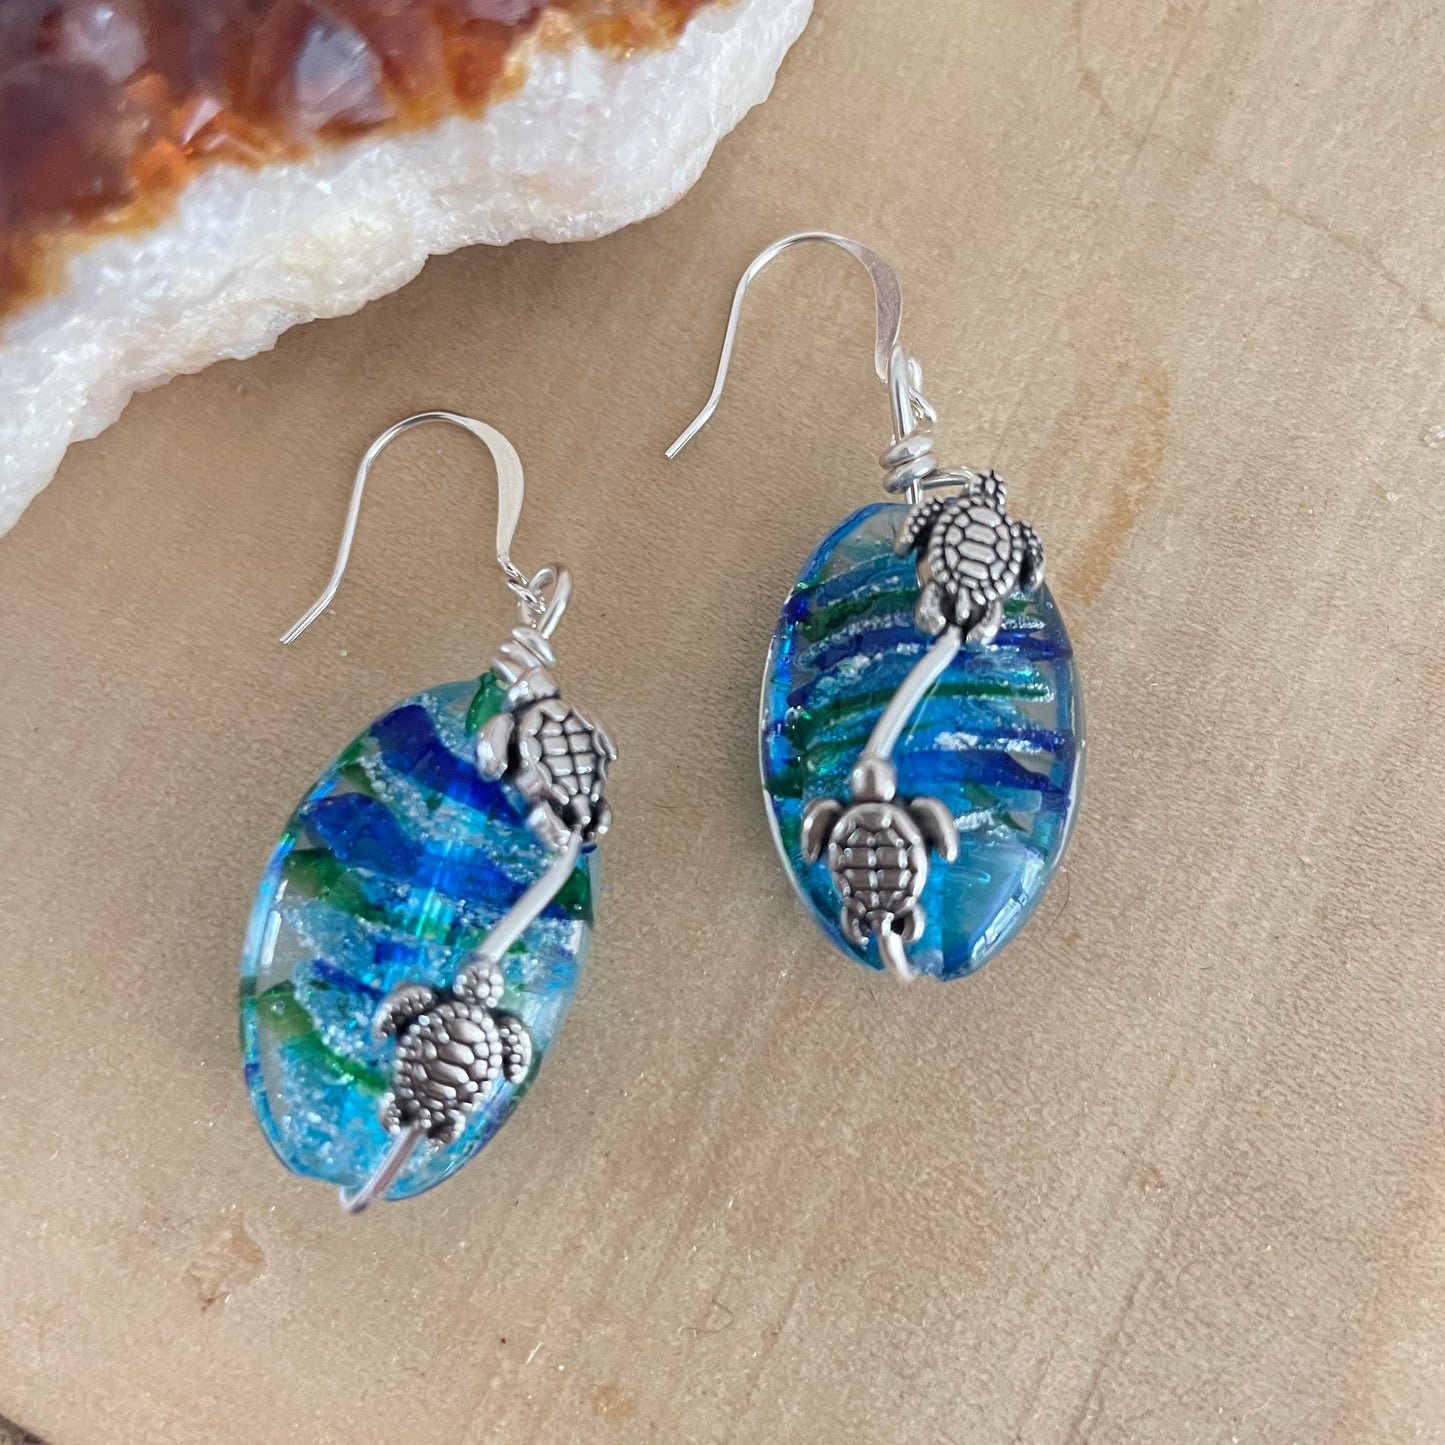 Swimming Mini Turtle Earrings Swirling Lampwork Glass Beads Handmade Blue Green Silver Mixed Metal Wire Wrapped